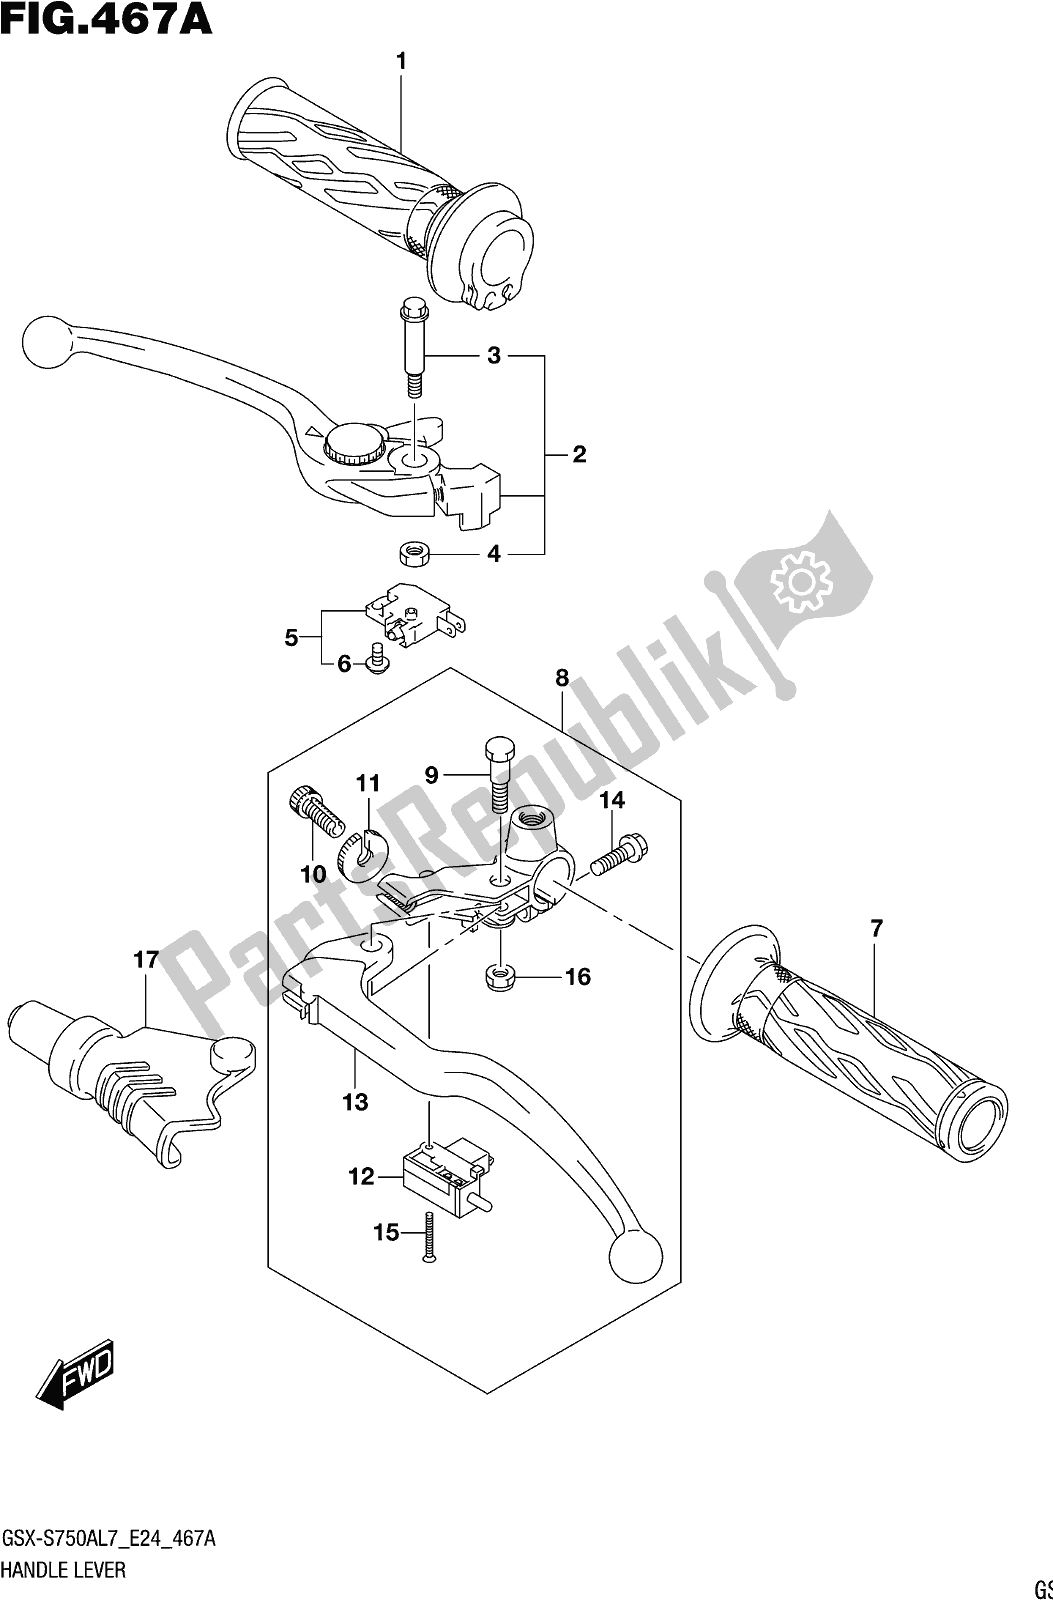 All parts for the Fig. 467a Handle Lever of the Suzuki Gsx-s 750 AZ 2017